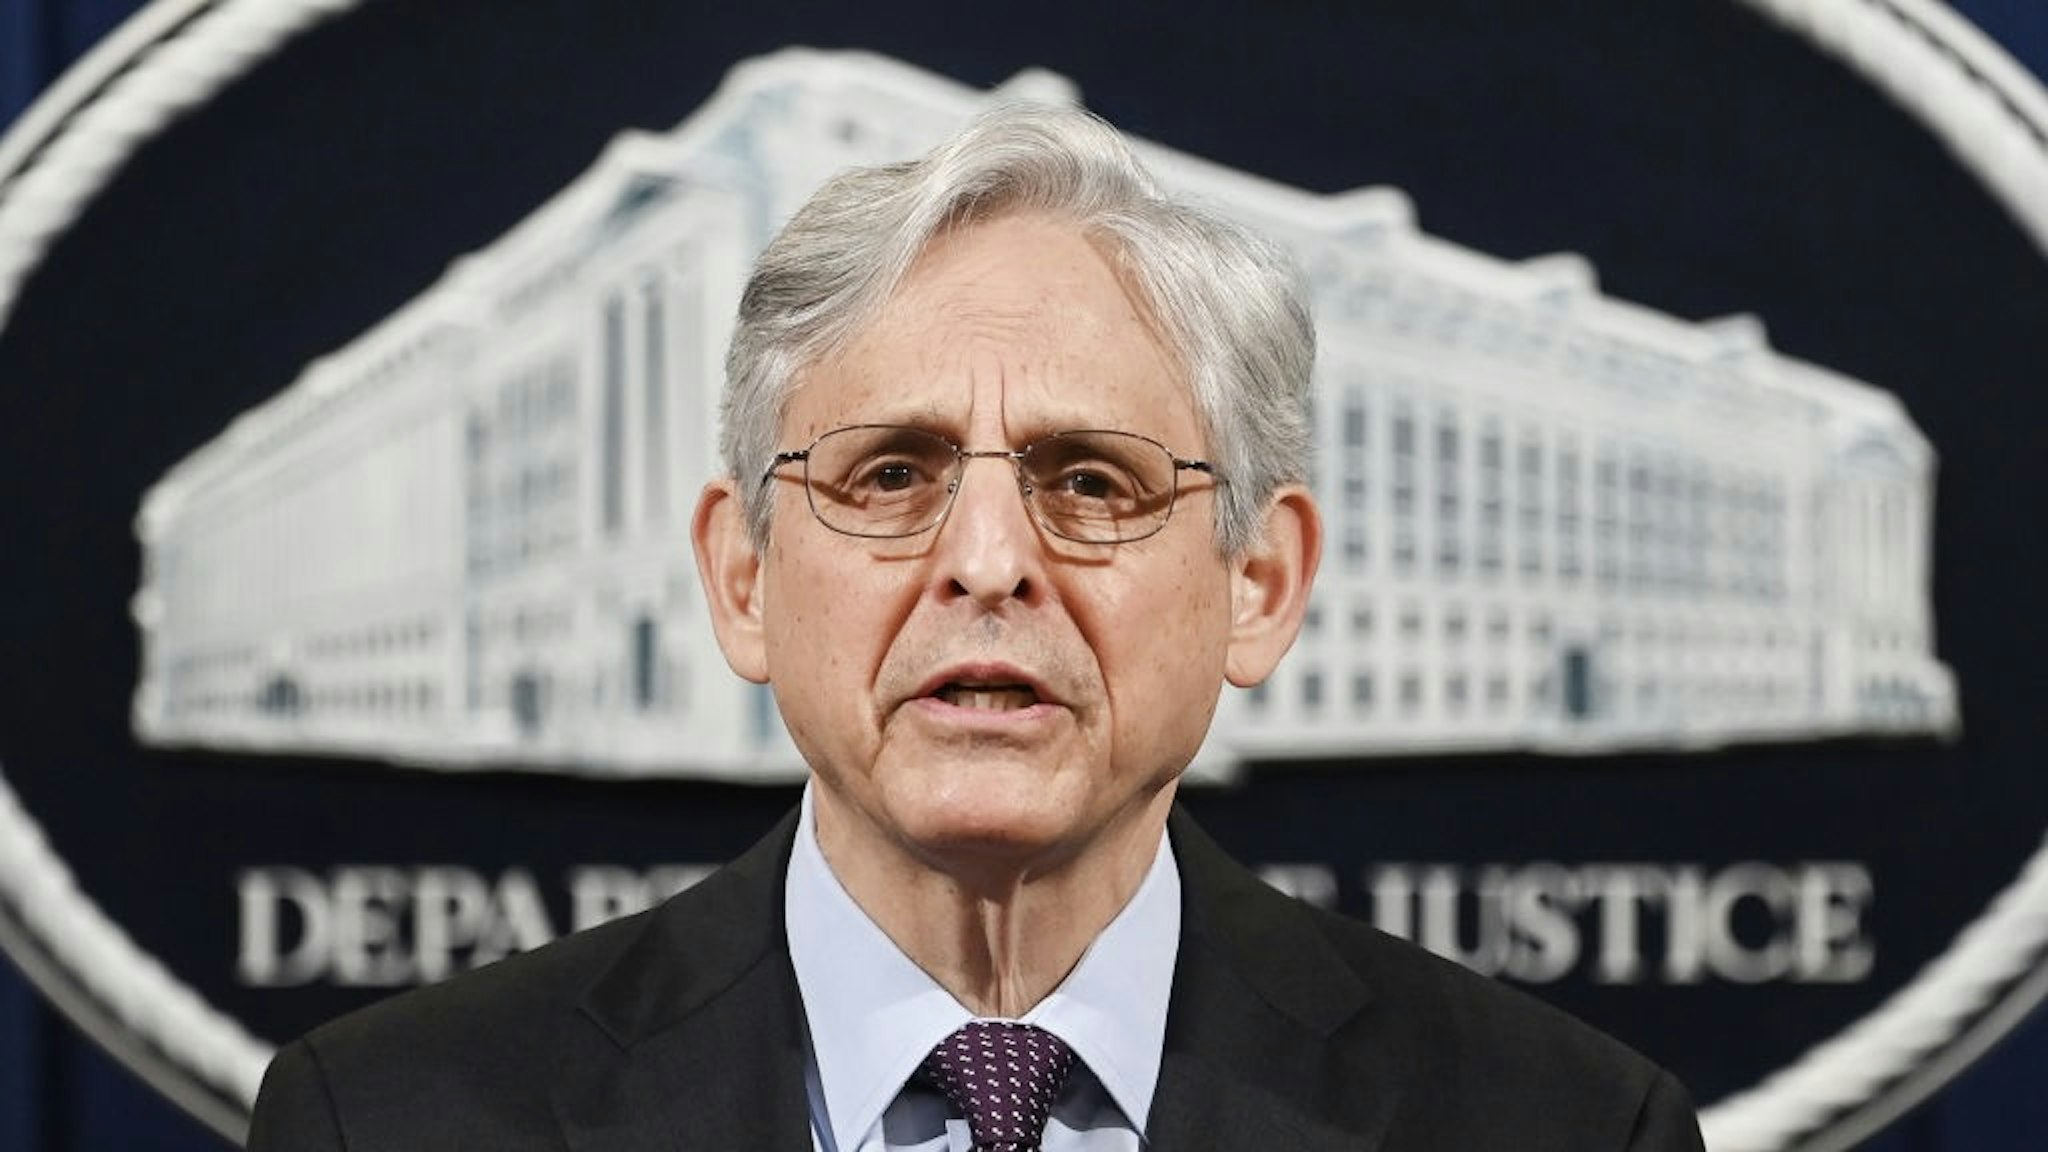 Attorney General Merrick Garland Delivers Remarks Merrick Garland, U.S. attorney general, speaks during a news conference at the Department of Justice in Washington, D.C., U.S., on Monday, April 26, 2021. Garland announced the Justice Department is opening an investigation into the Louisville Police Department, which has faced scrutiny since the fatal shooting of a Black woman, Breonna Taylor, in her home. Photographer: Mandel Ngan/AFP/Bloomberg via Getty Images